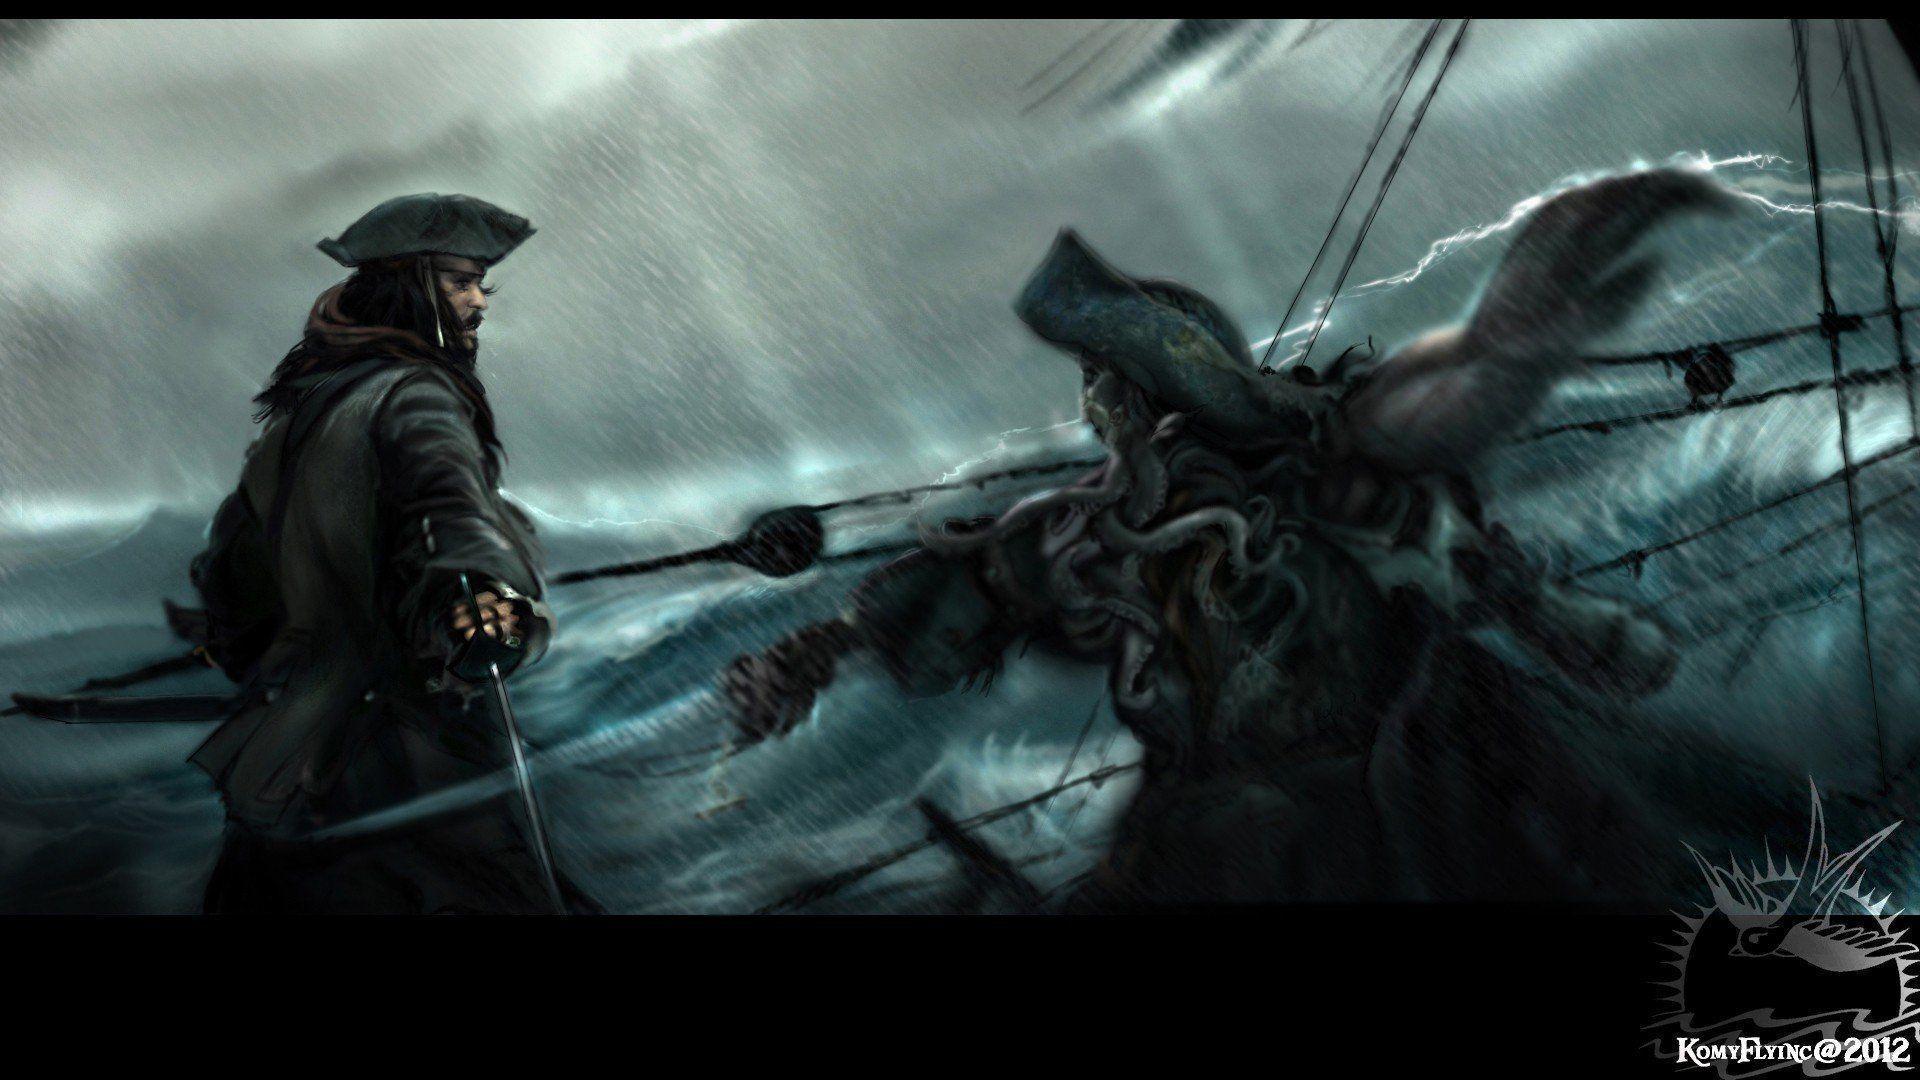 Ocean fighting pirates weapons Pirates of the Caribbean battles